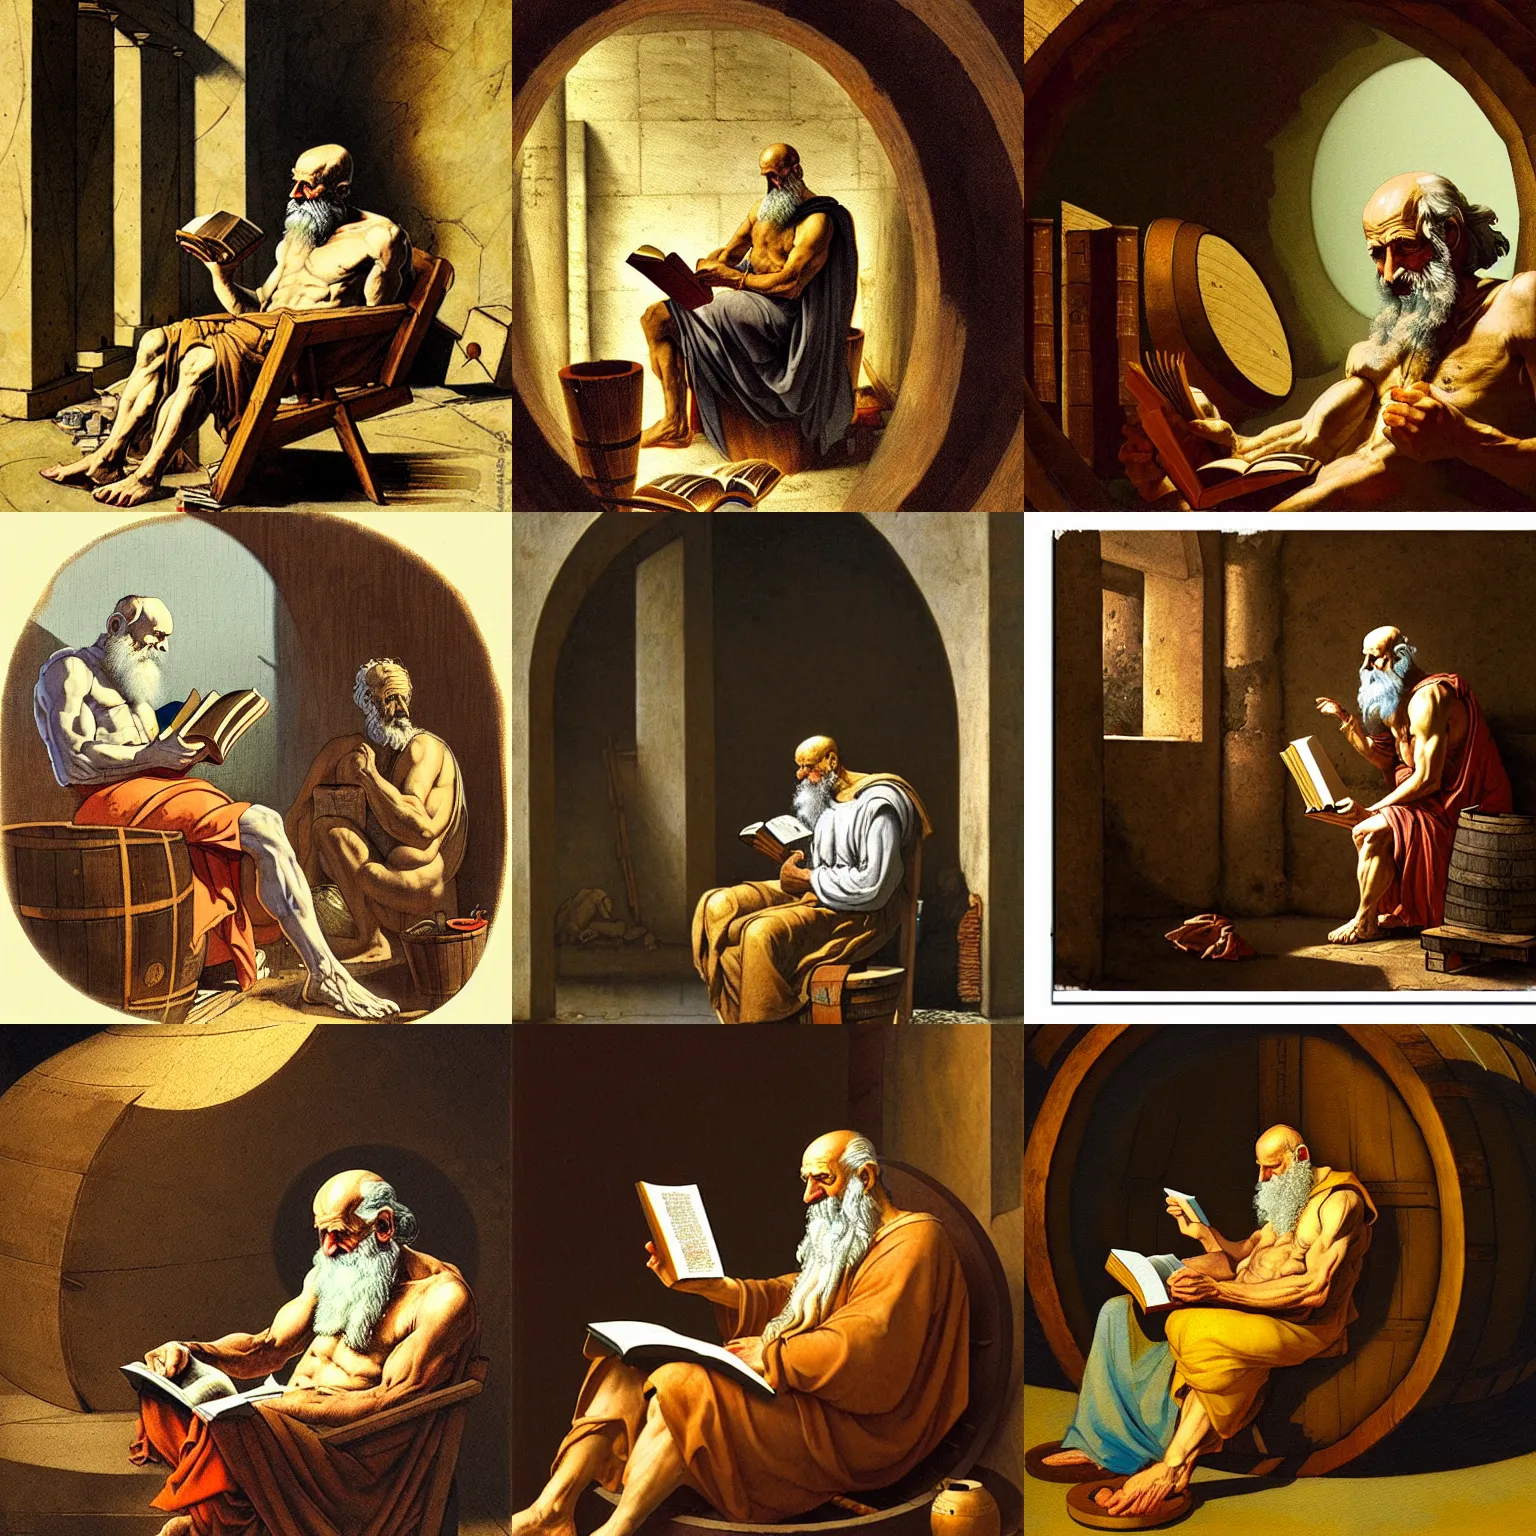 diogenes of sipone reading a book inside his barrel, | Stable Diffusion ...